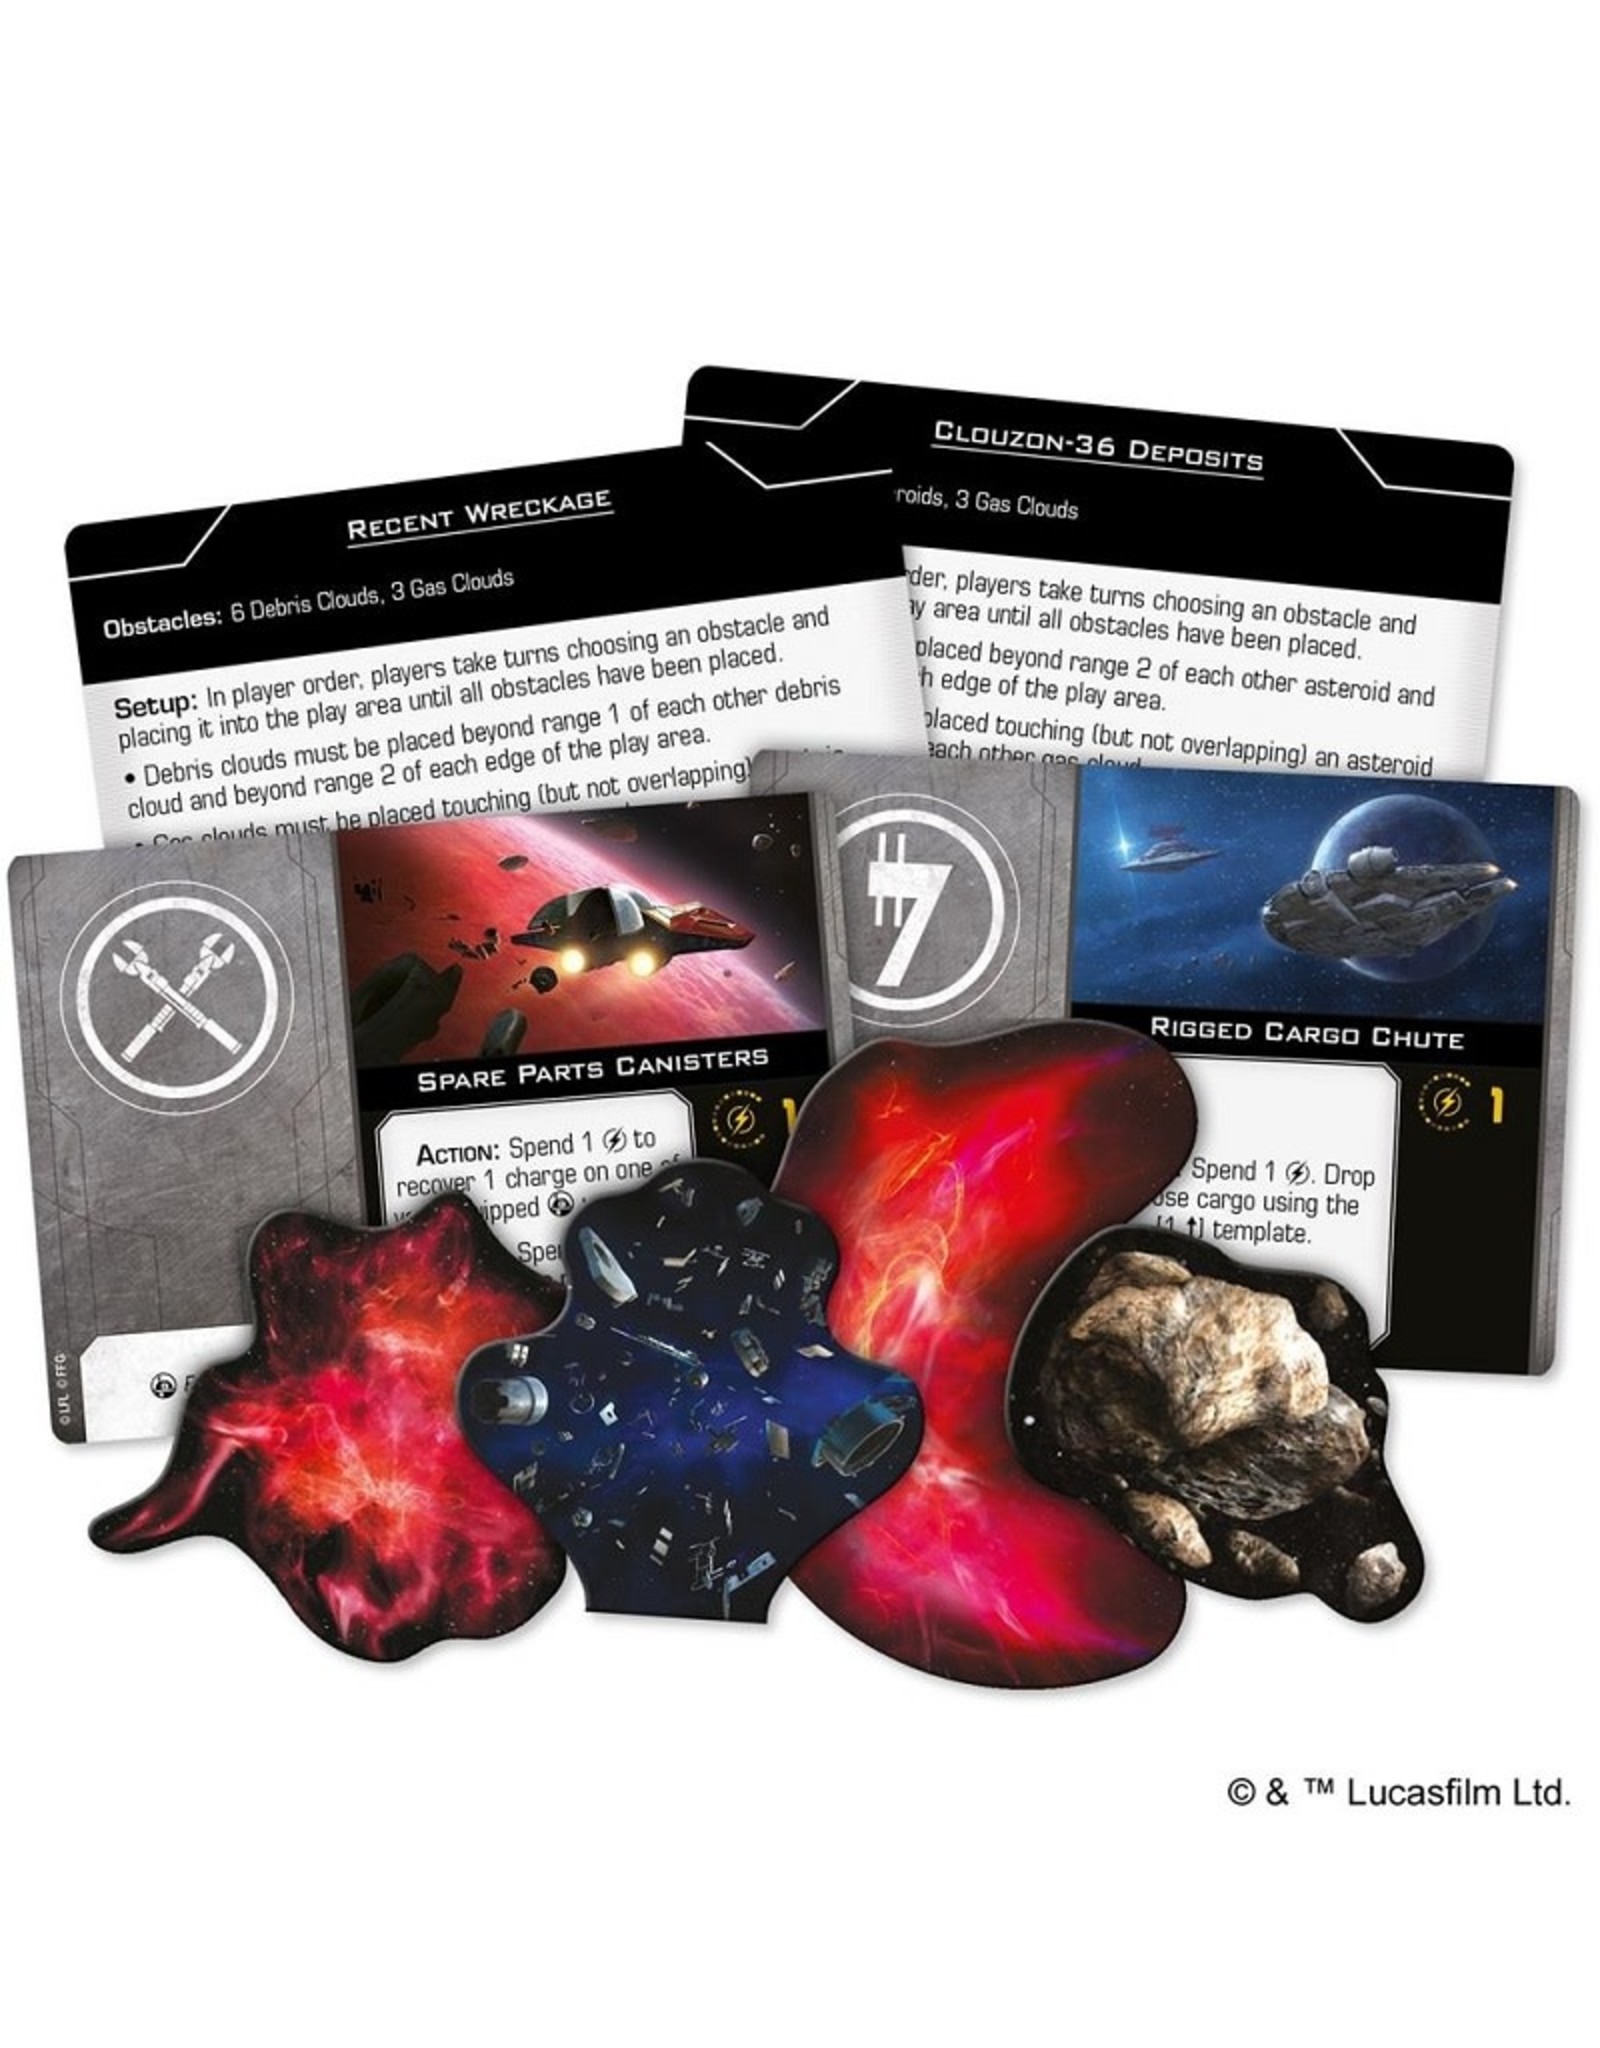 Atomic Mass Games Star Wars X-Wing: Never Tell Me The Odds Obstacles Pack - 2nd Edition